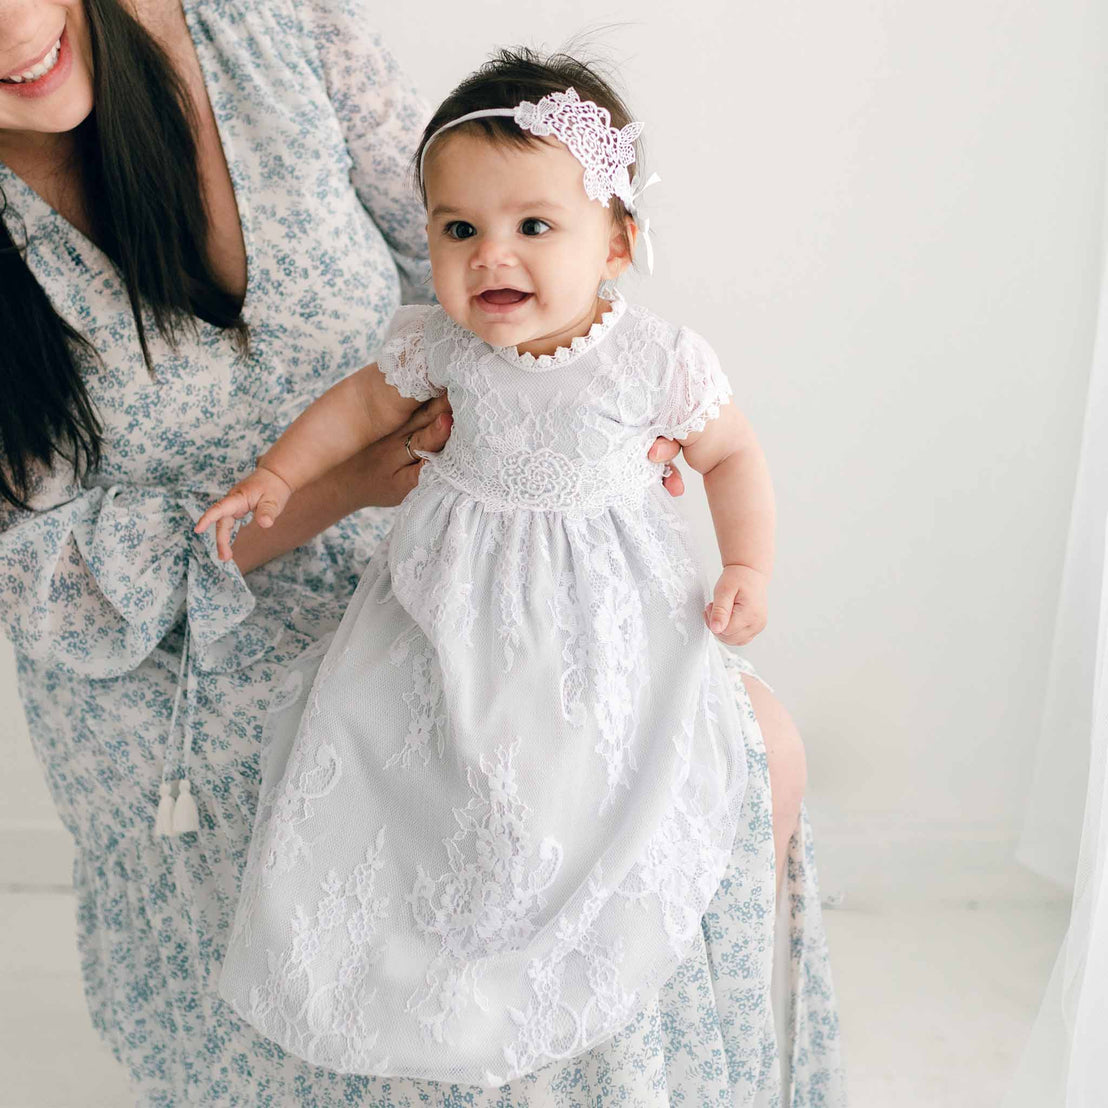 A smiling baby in an Olivia Layette and headband stands supported by a woman's hands, partially visible, in a floral dress against a white backdrop for a baptism.